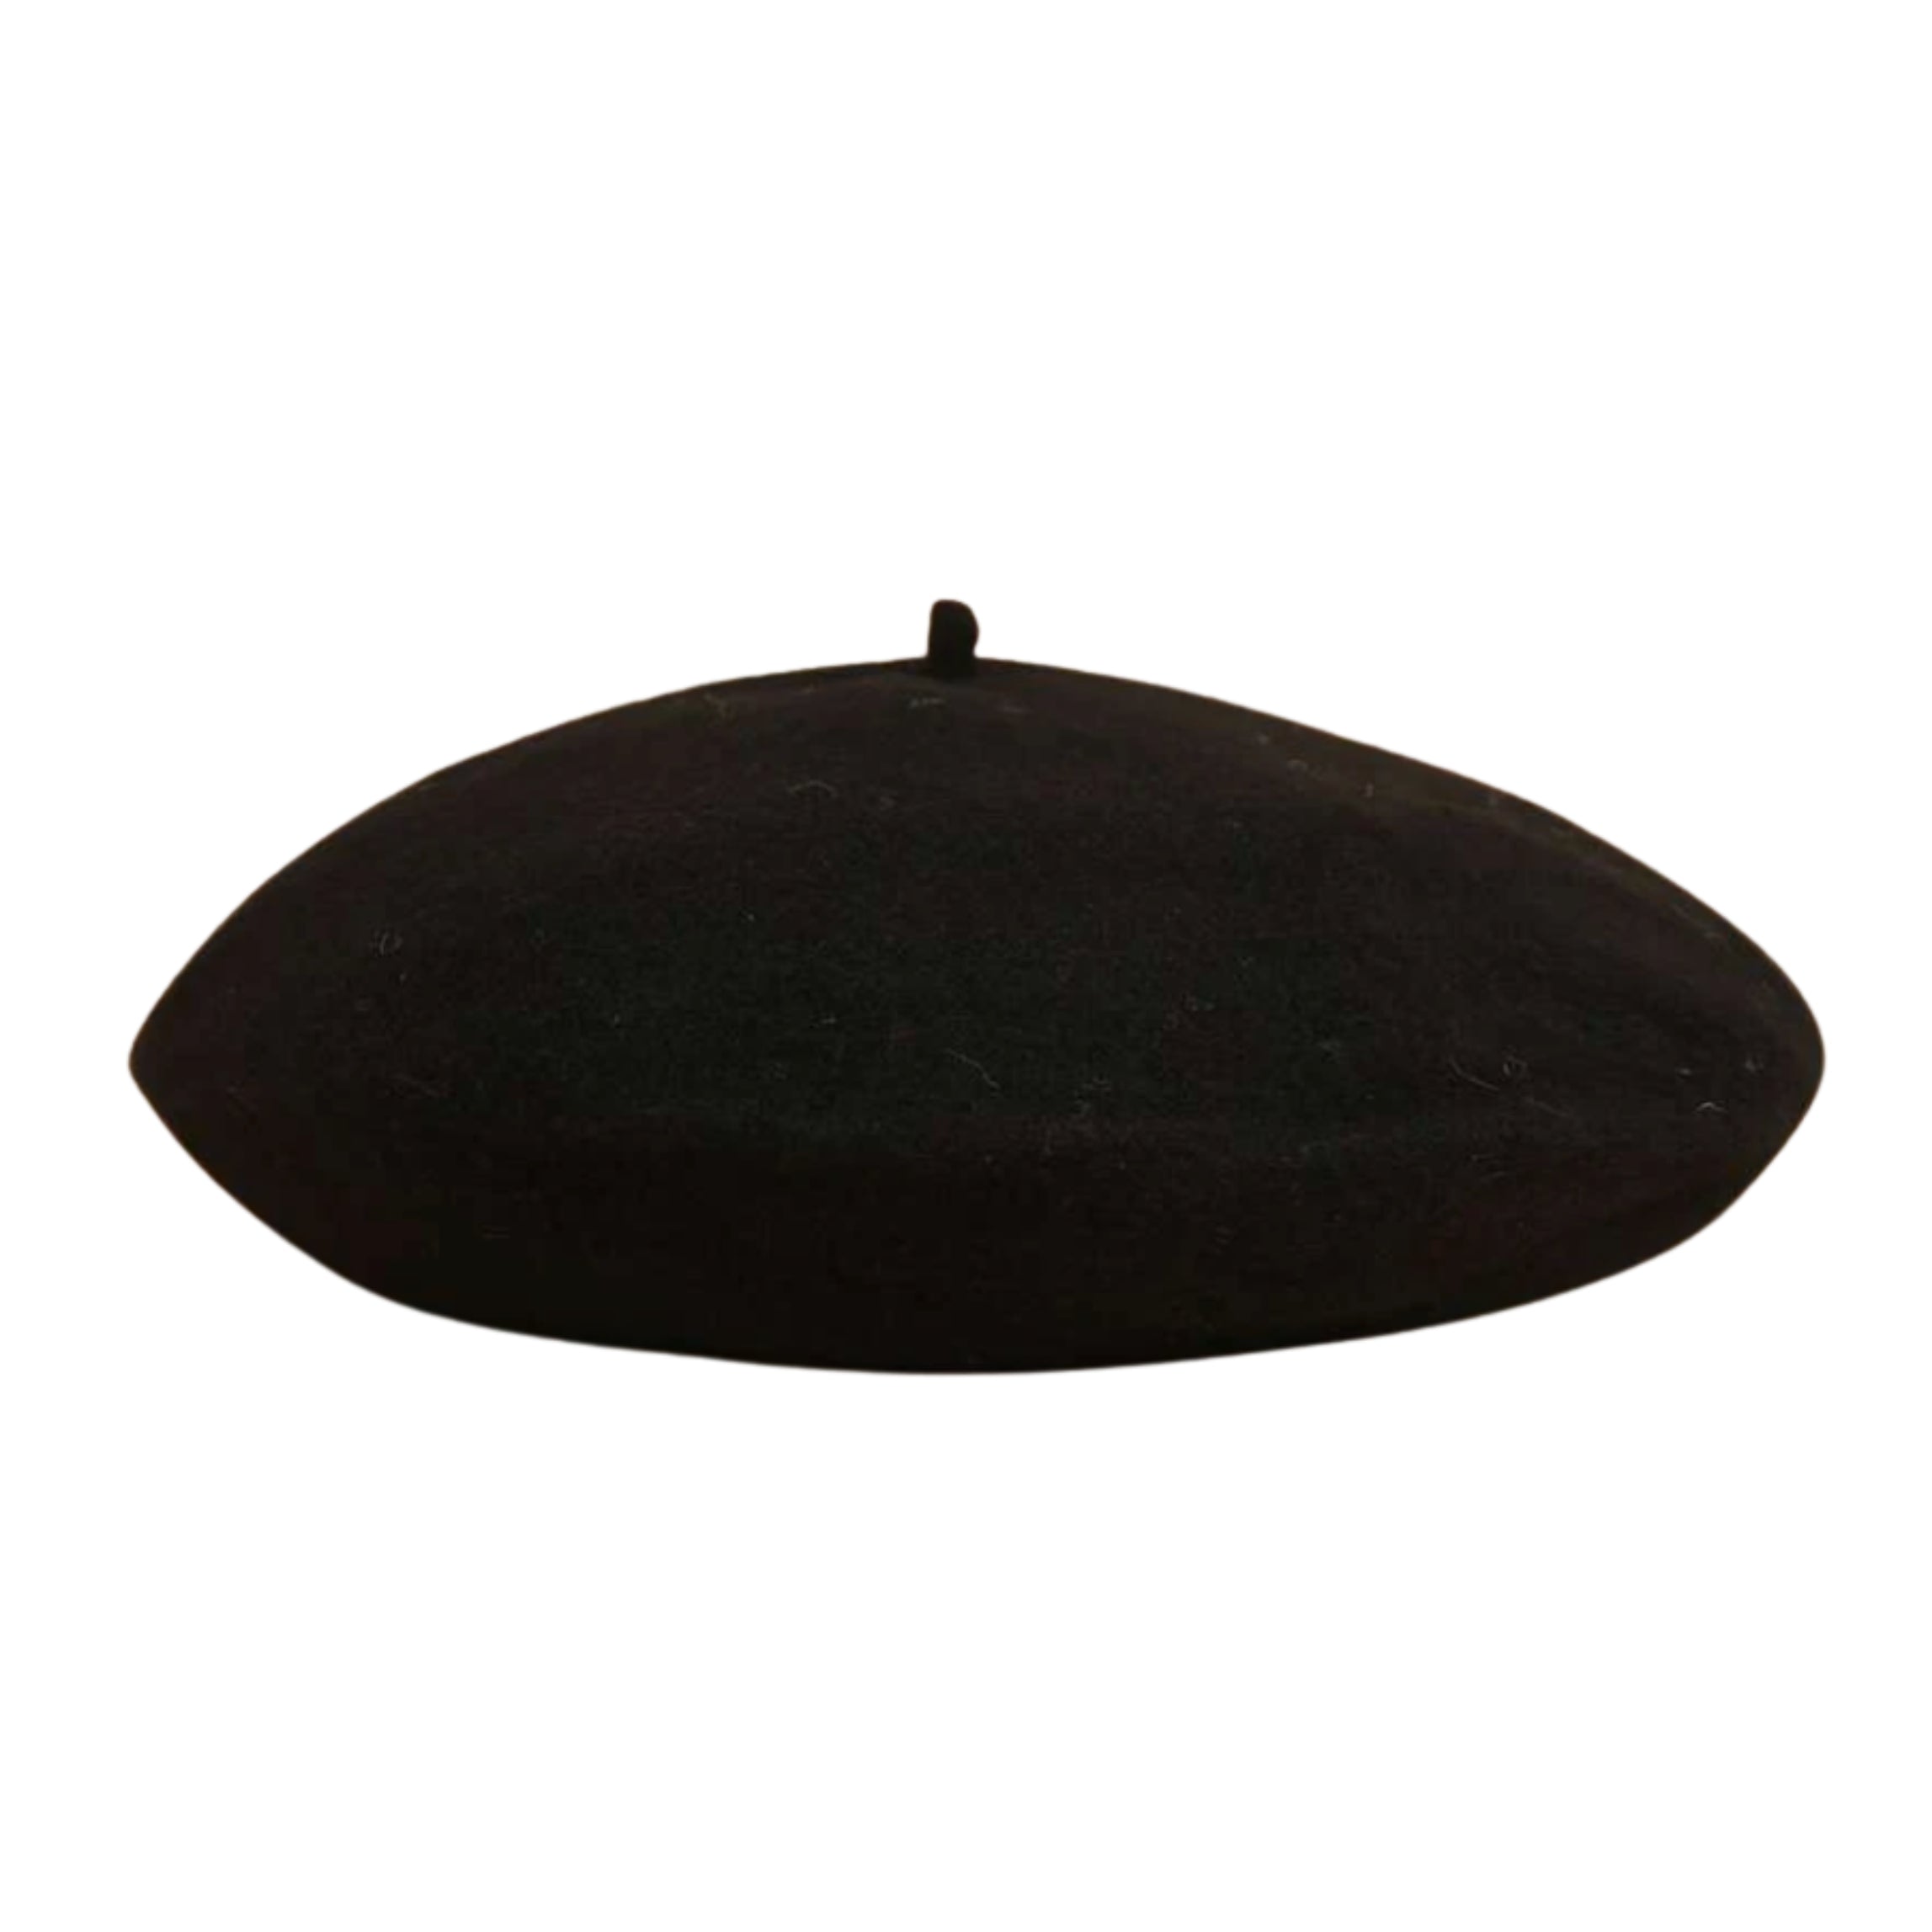 Simple Solid Beret